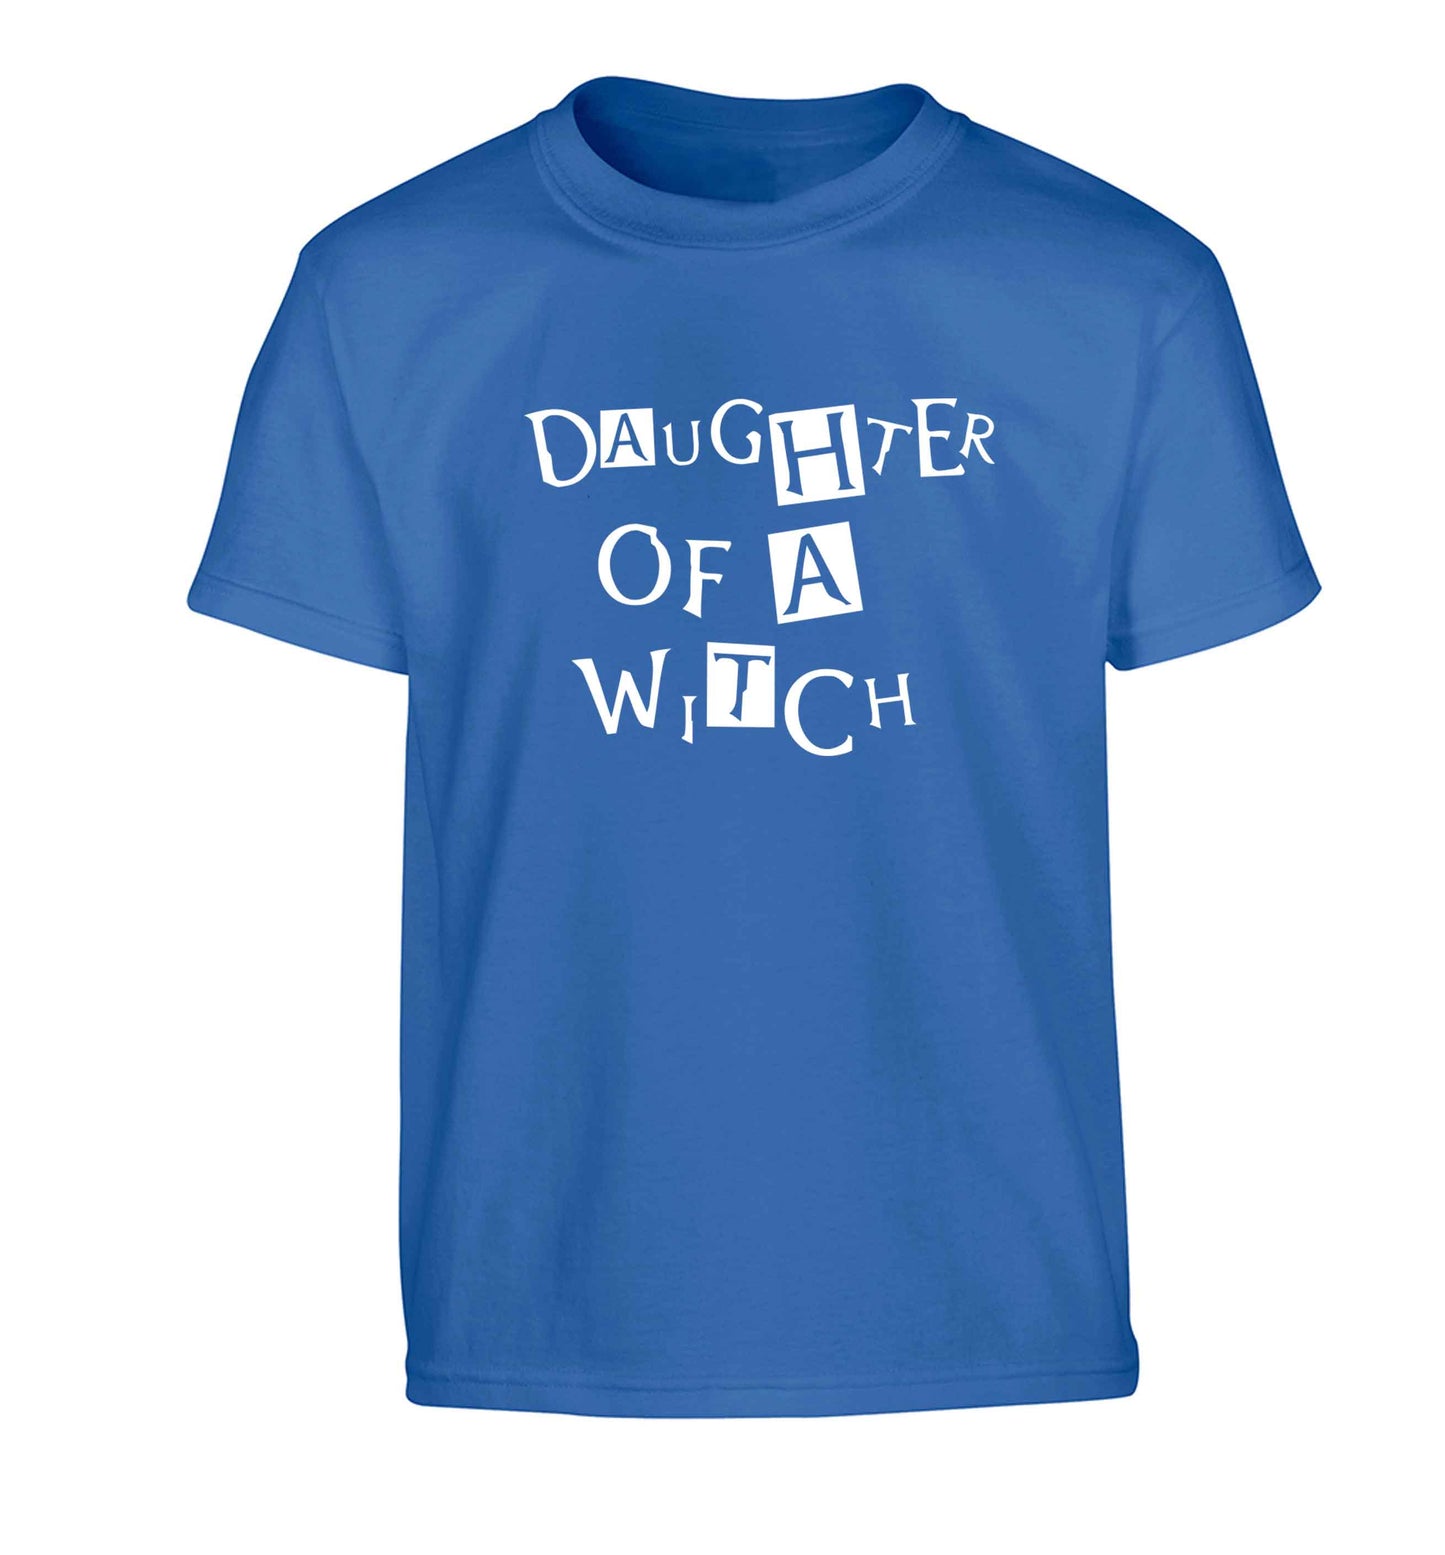 Daughter of a witch Children's blue Tshirt 12-13 Years